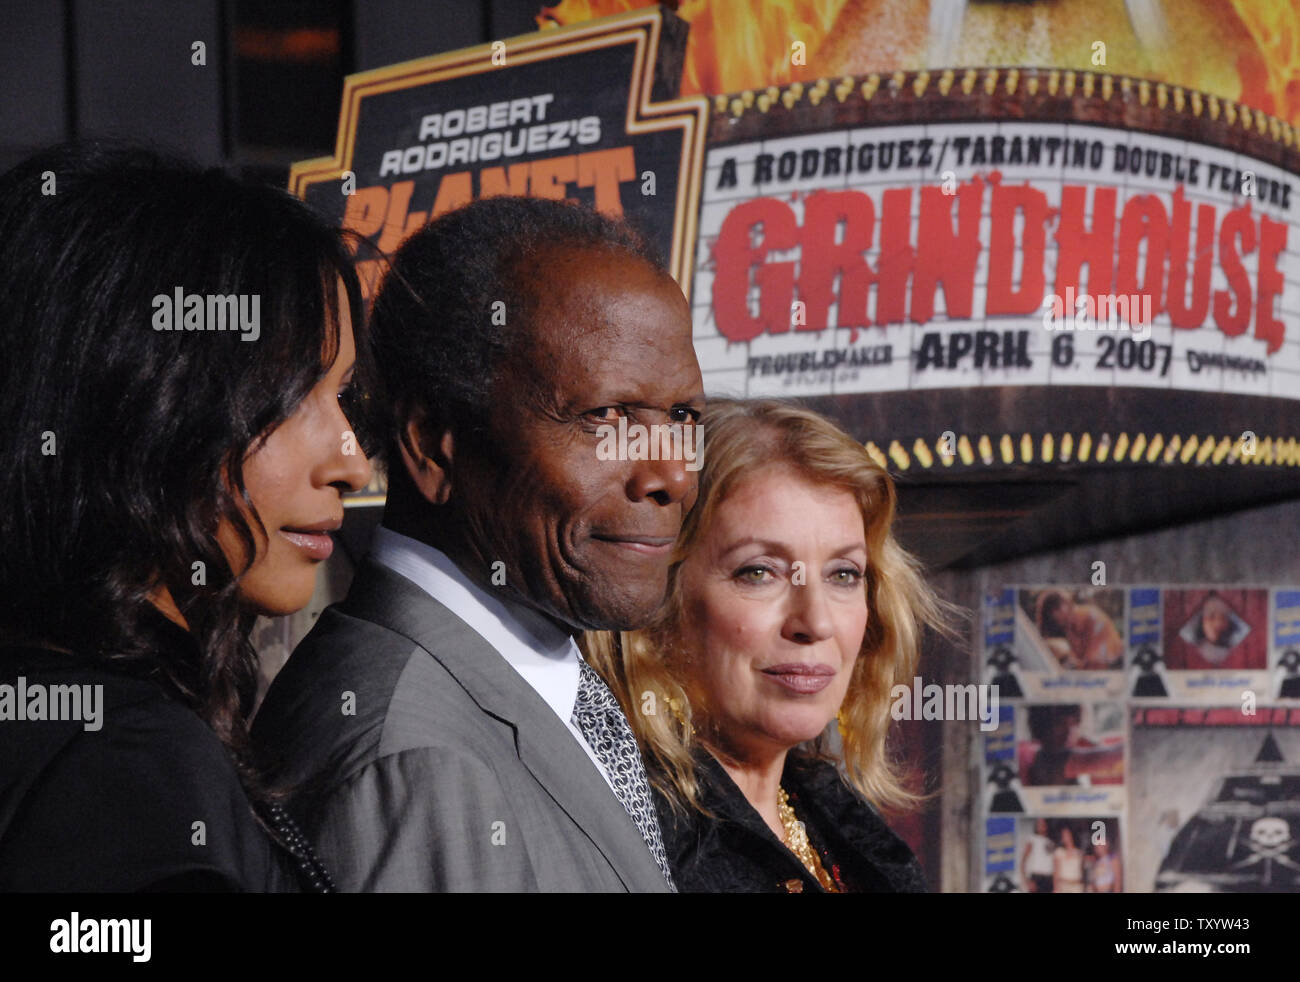 Actor Sydney Poitier (C) arrives with his wife Joanna Shimkus (R) and their daughter for the premiere of the motion picture sci-fi crime thriller 'Grindhouse' at the Orpheum Theatre in Los Angeles on March 26, 2007. The movie features two full length horror movies, 'Death Proof' and 'Planet Terror', written and directed respectively by Quentin Tarantino and Robert Rodriguez. (UPI Photo/Jim Ruymen) Stock Photo